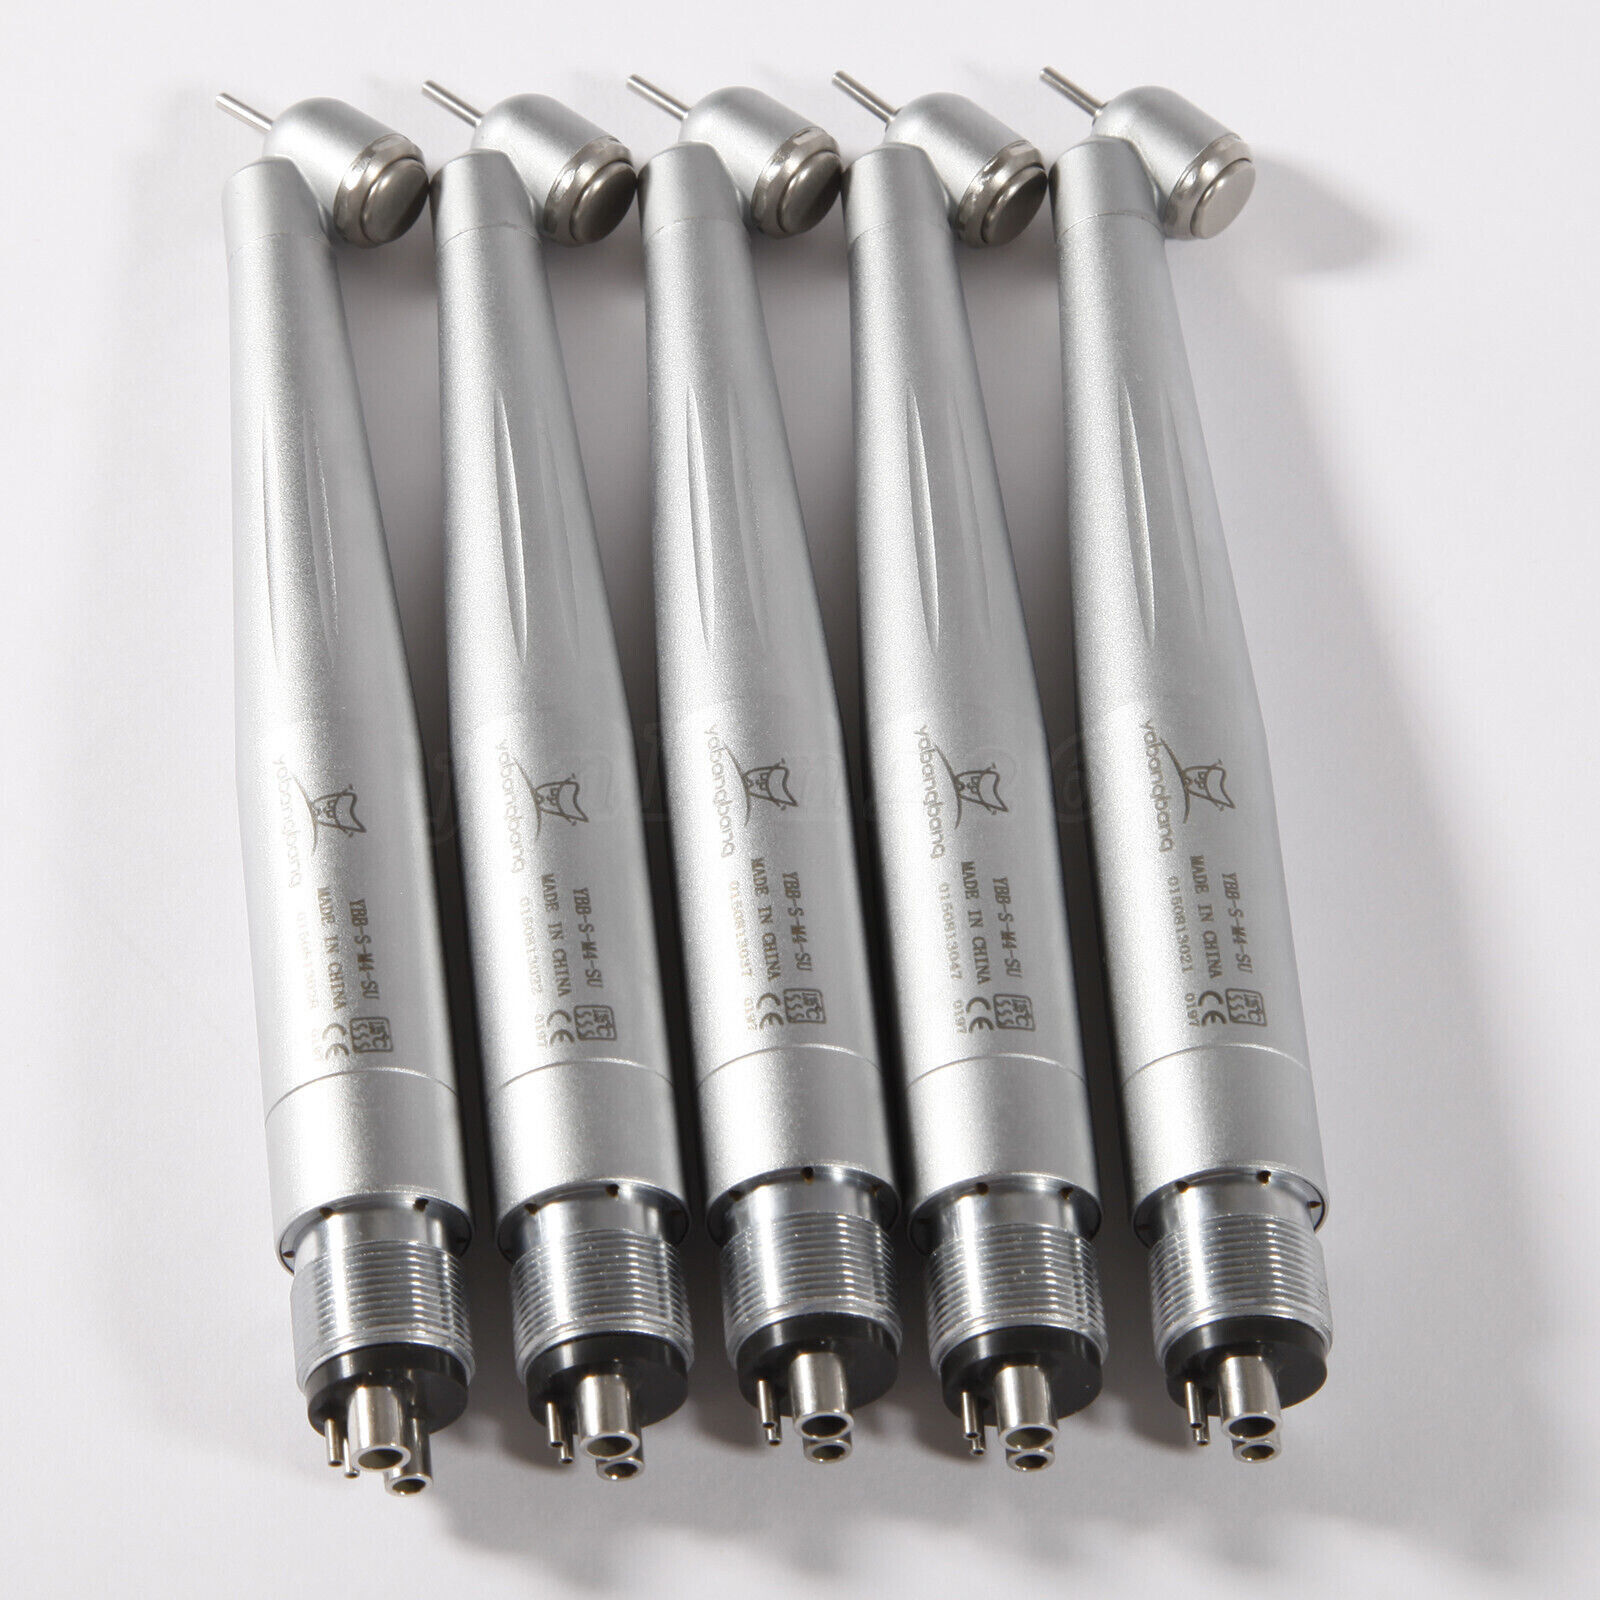 5* NSK Style Dental 45 Degree Surgical Handpiece High Speed Push Air Turbine 45°